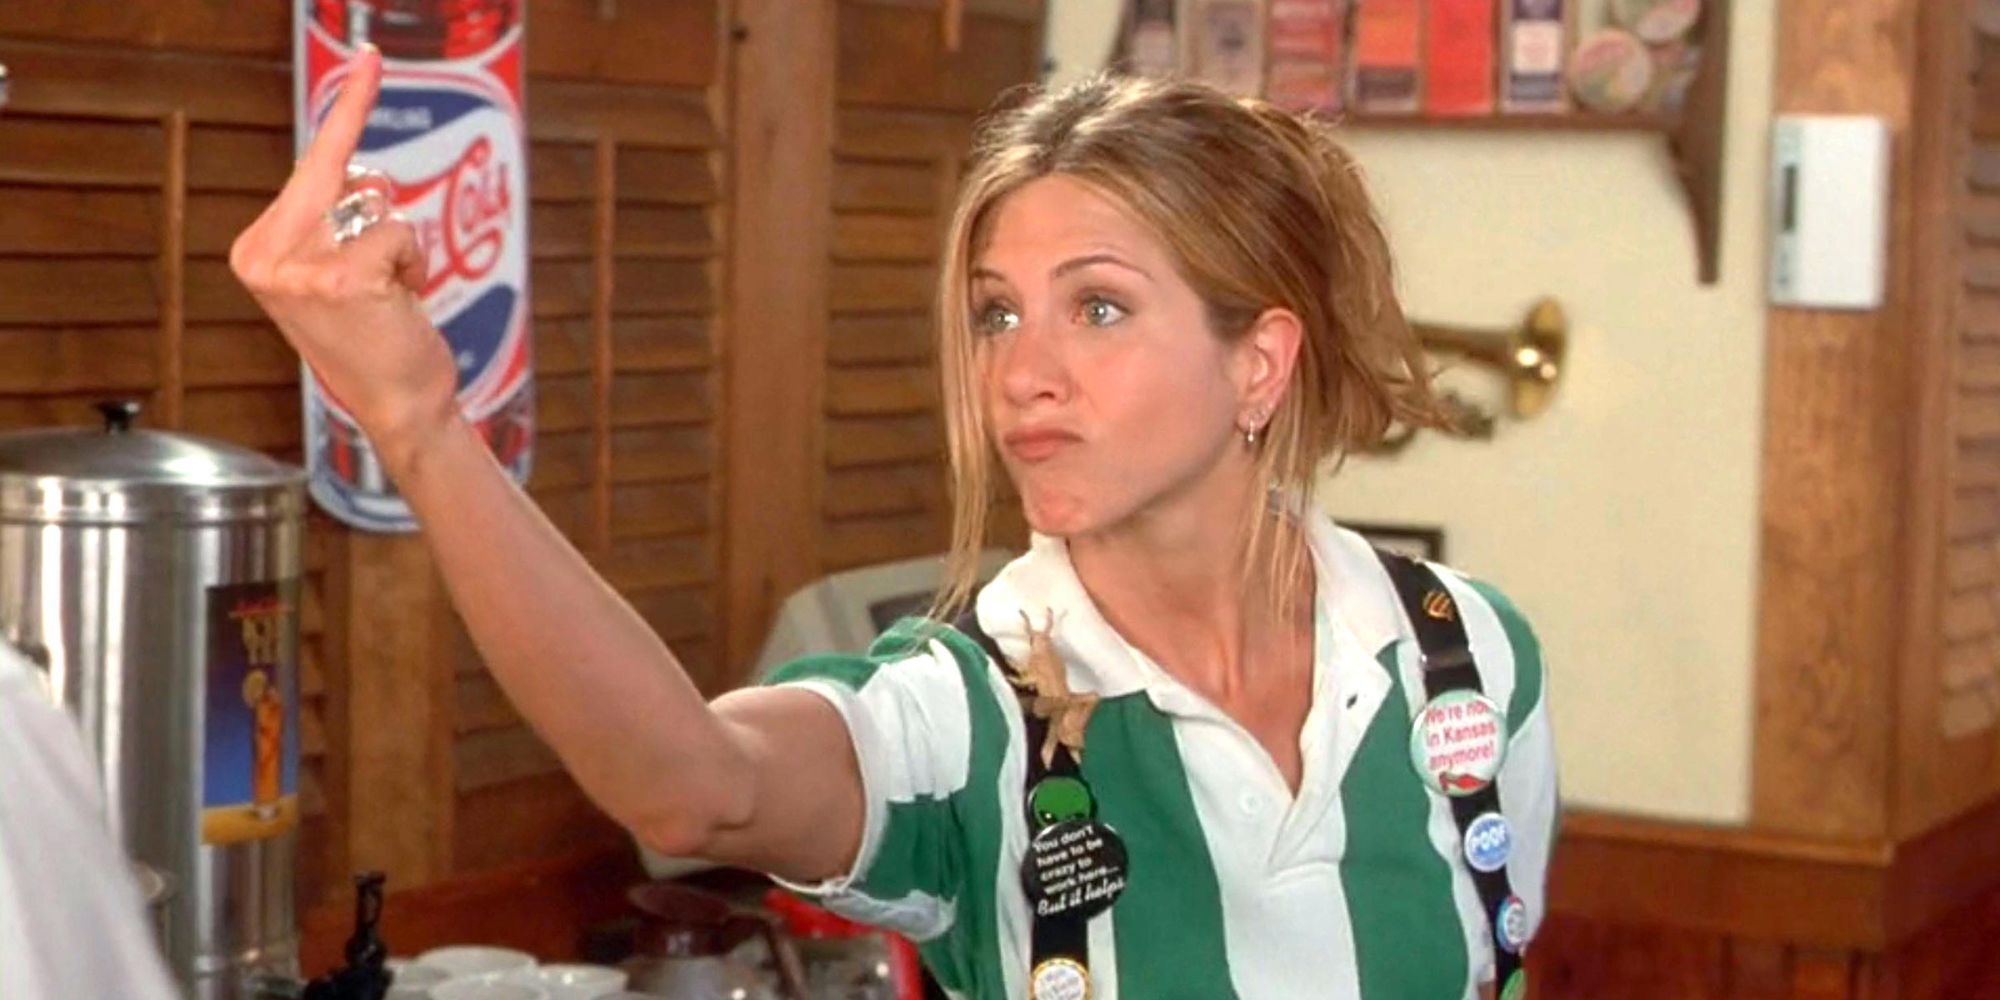 Joanna from Office Space pointing her middle finger 